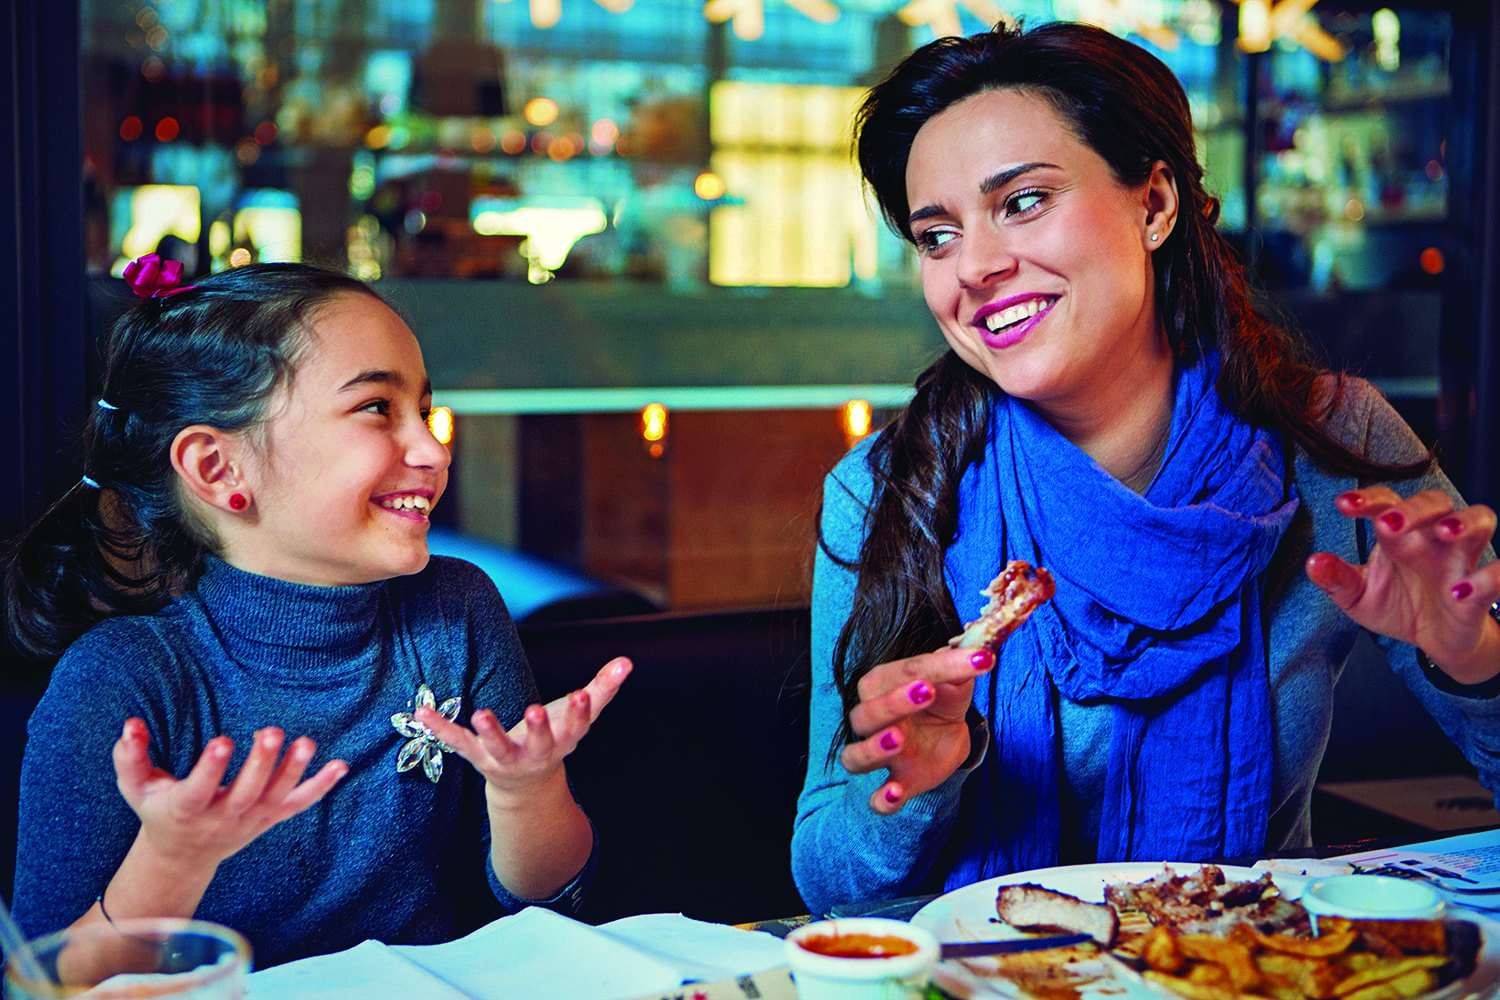 Mother and daughter enjoying a meal and conversation at a restaurant.